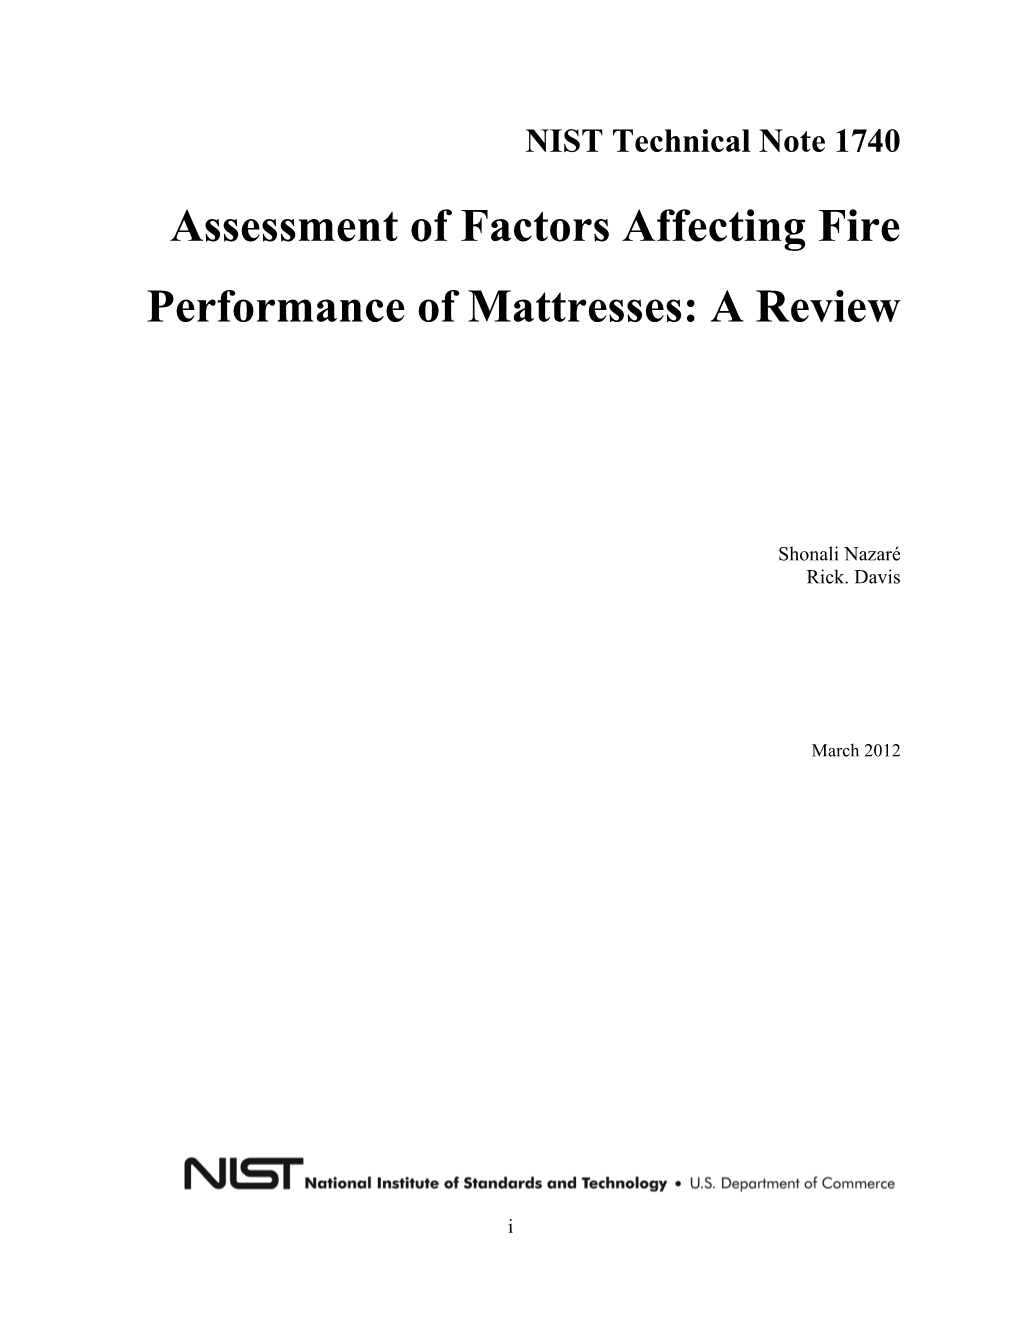 Assessment of Factors Affecting Fire Performance of Mattresses: a Review